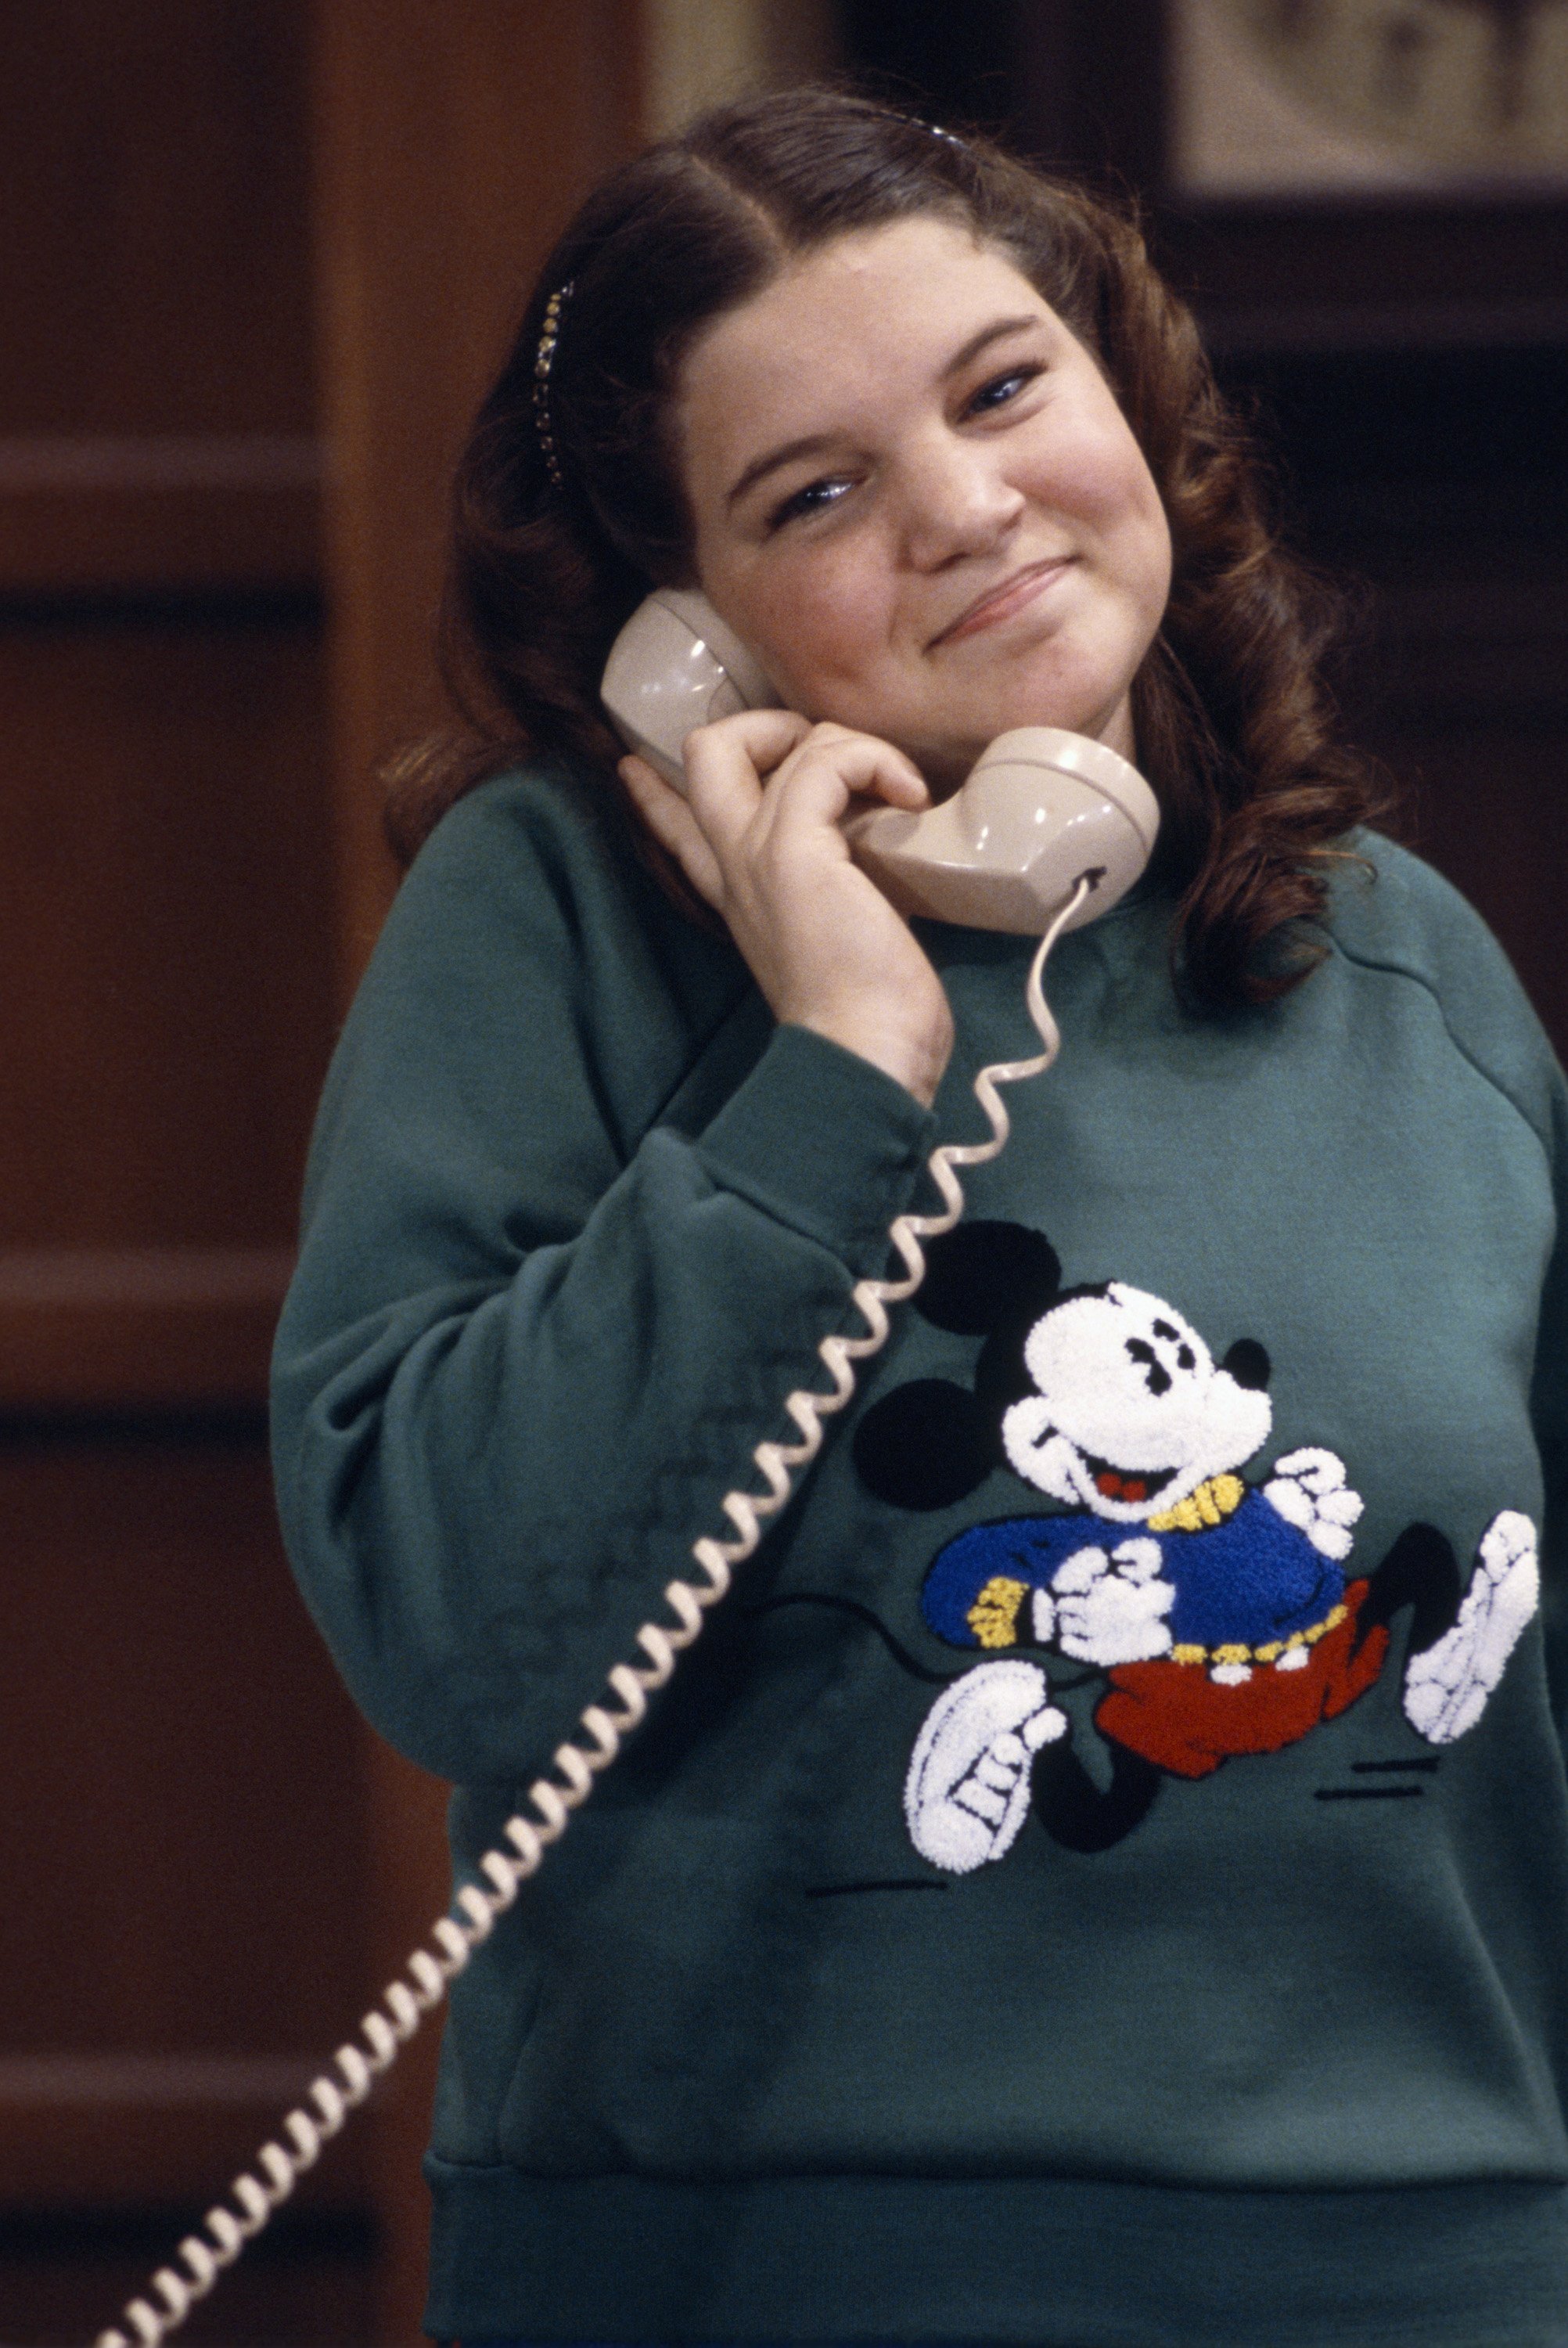 Mindy Cohn as Natalie Green in "The Facts of Life," on May 2, 1980 | Source: Getty Images